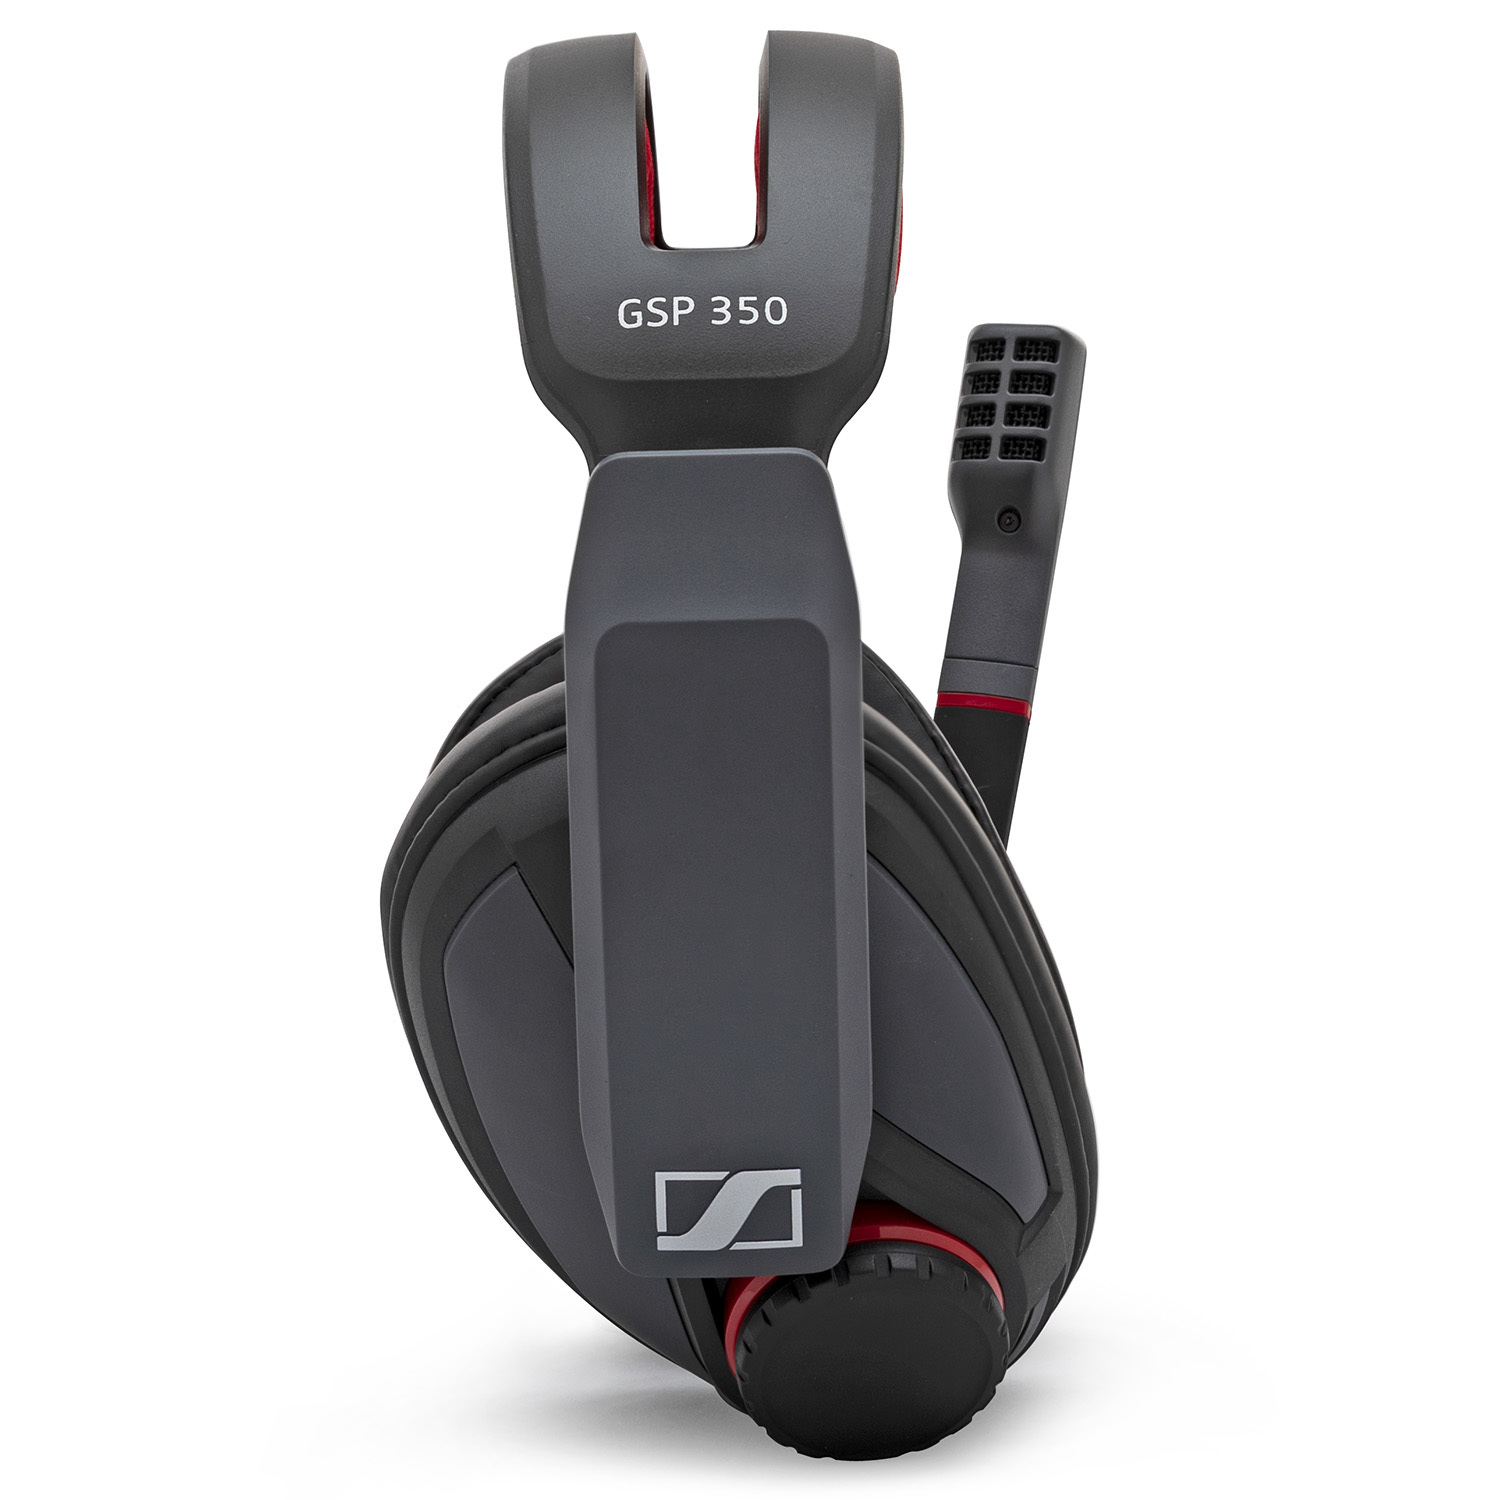 plads elite melodisk Sennheiser GSP 350 PC Gaming Headset with Dolby 7.1 Surround Sound